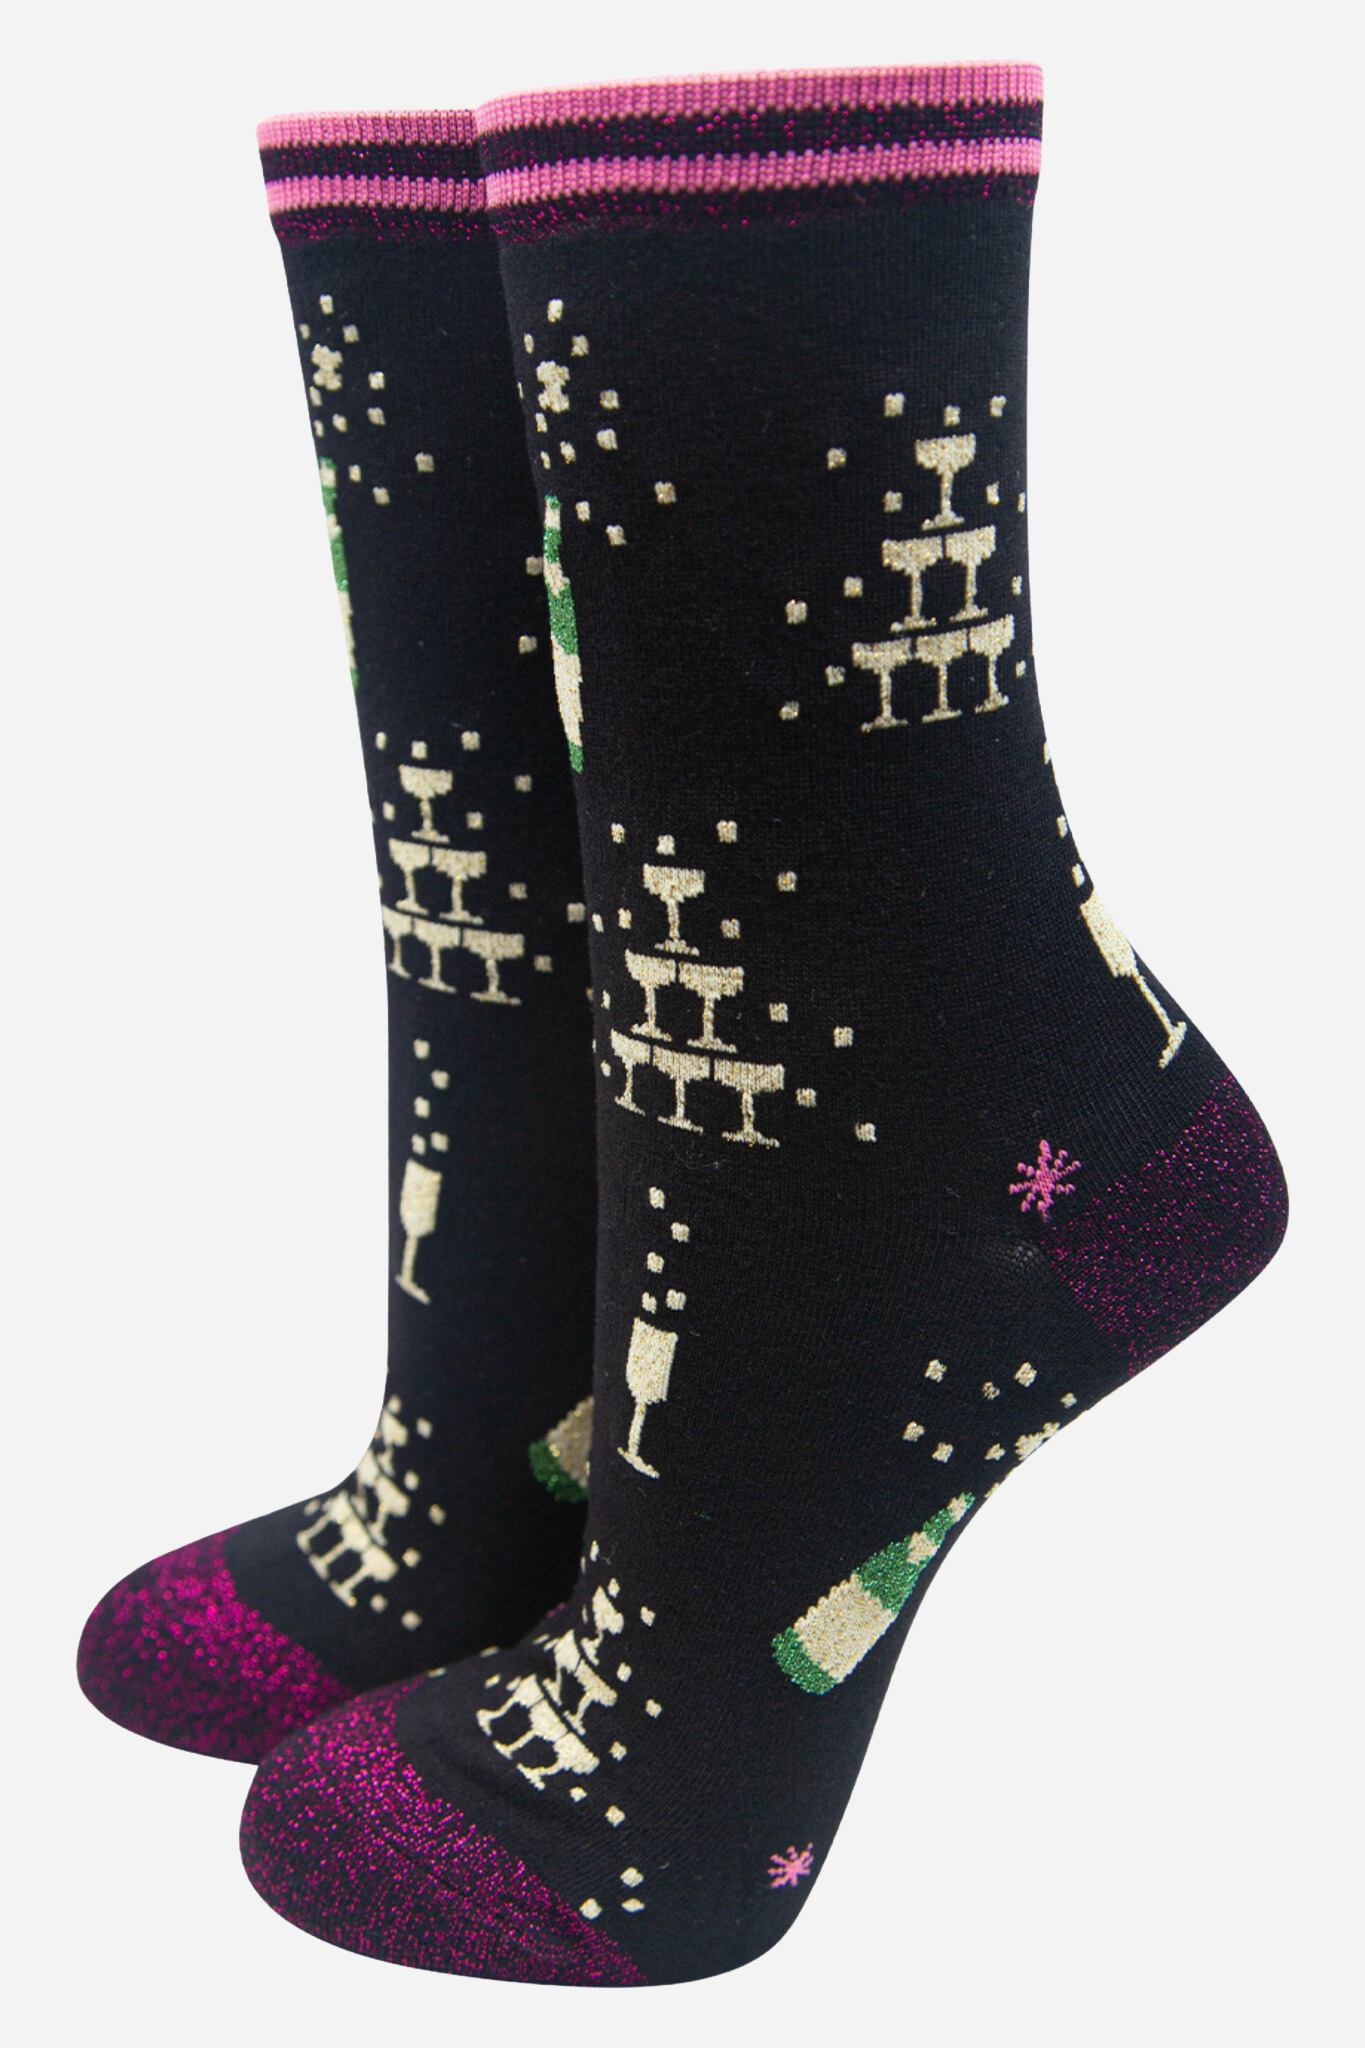 black bamboo socks with gold glitter champagne glasses and bottles, the socks have a pink glitter heel, toe and cuff